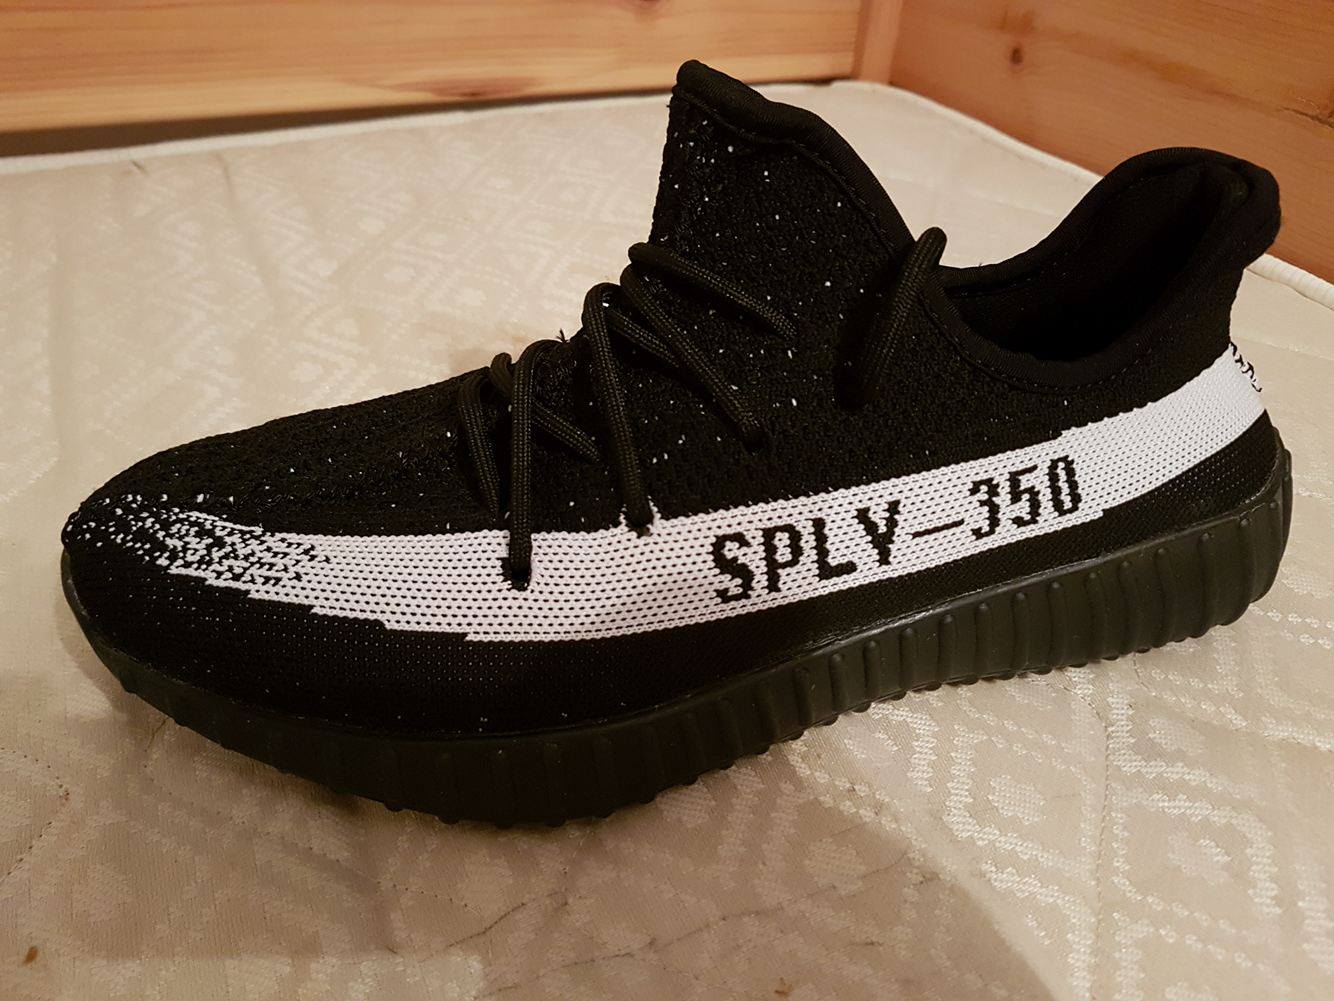 Cheap Ad Yeezy 350 Boost V2 Men Aaa Quality039